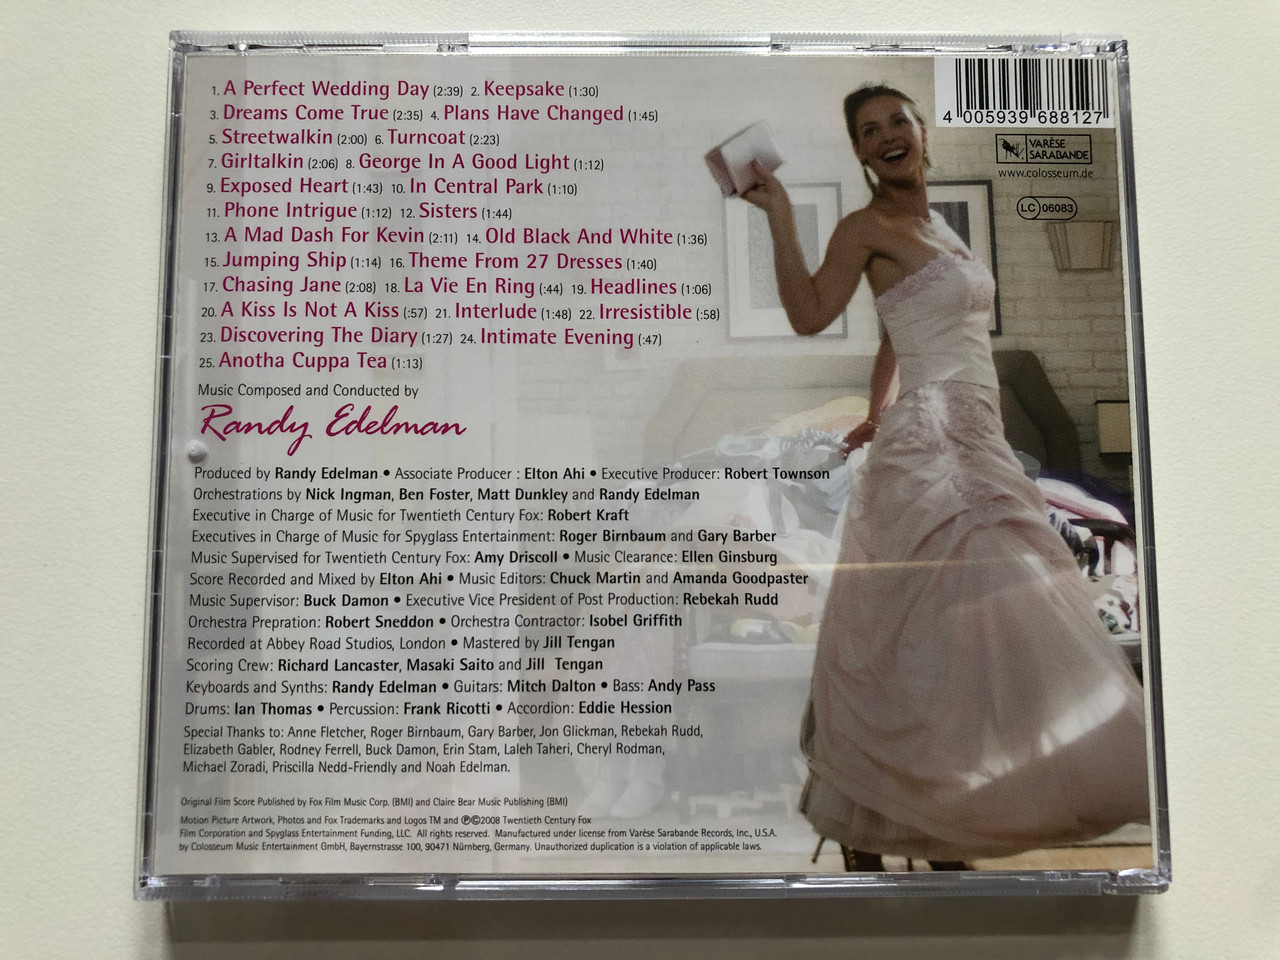 27 Dresses (Original Motion Picture Soundtrack) - Music Composed and ...